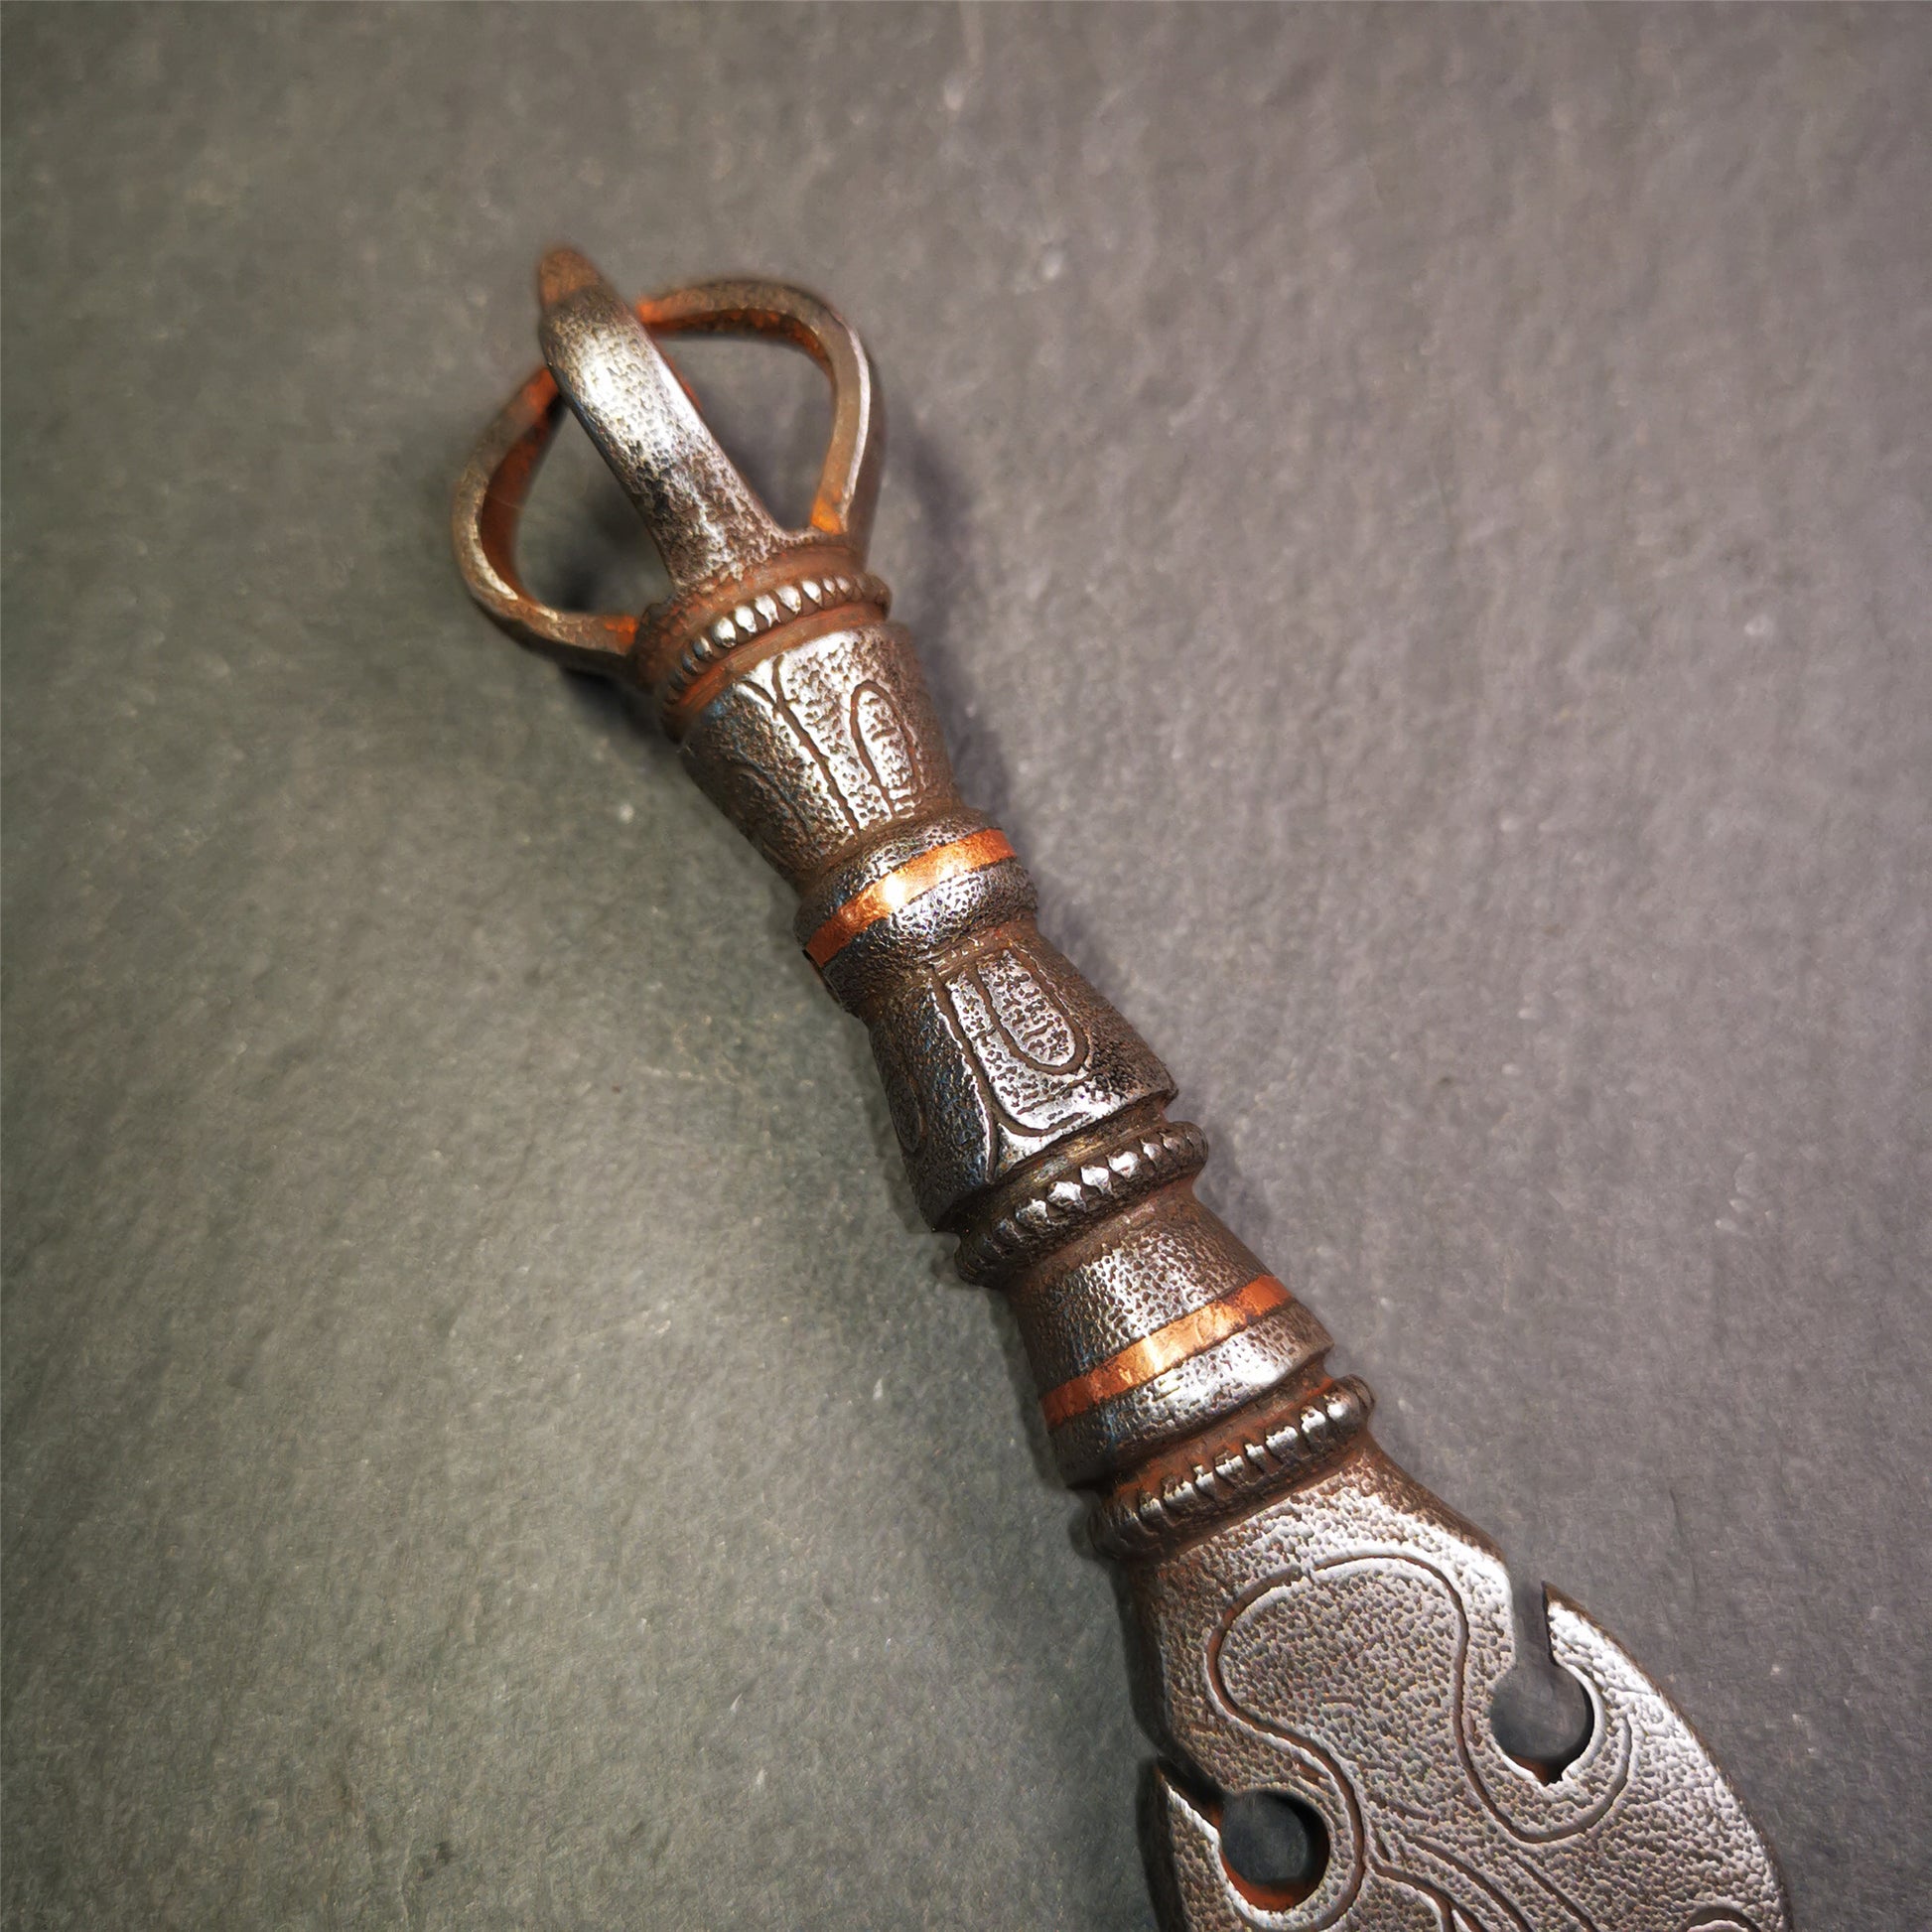 This phurba kila is handmade by Tibetan craftsmen from Tibet in 2000's,from Hepo Town, Baiyu County, the birthplace of the famous Tibetan handicrafts.  It's a kila dagger,made of cold iron, carved cloud pattern, inlaid red copper, and the half vajra on the handle,very delicate.